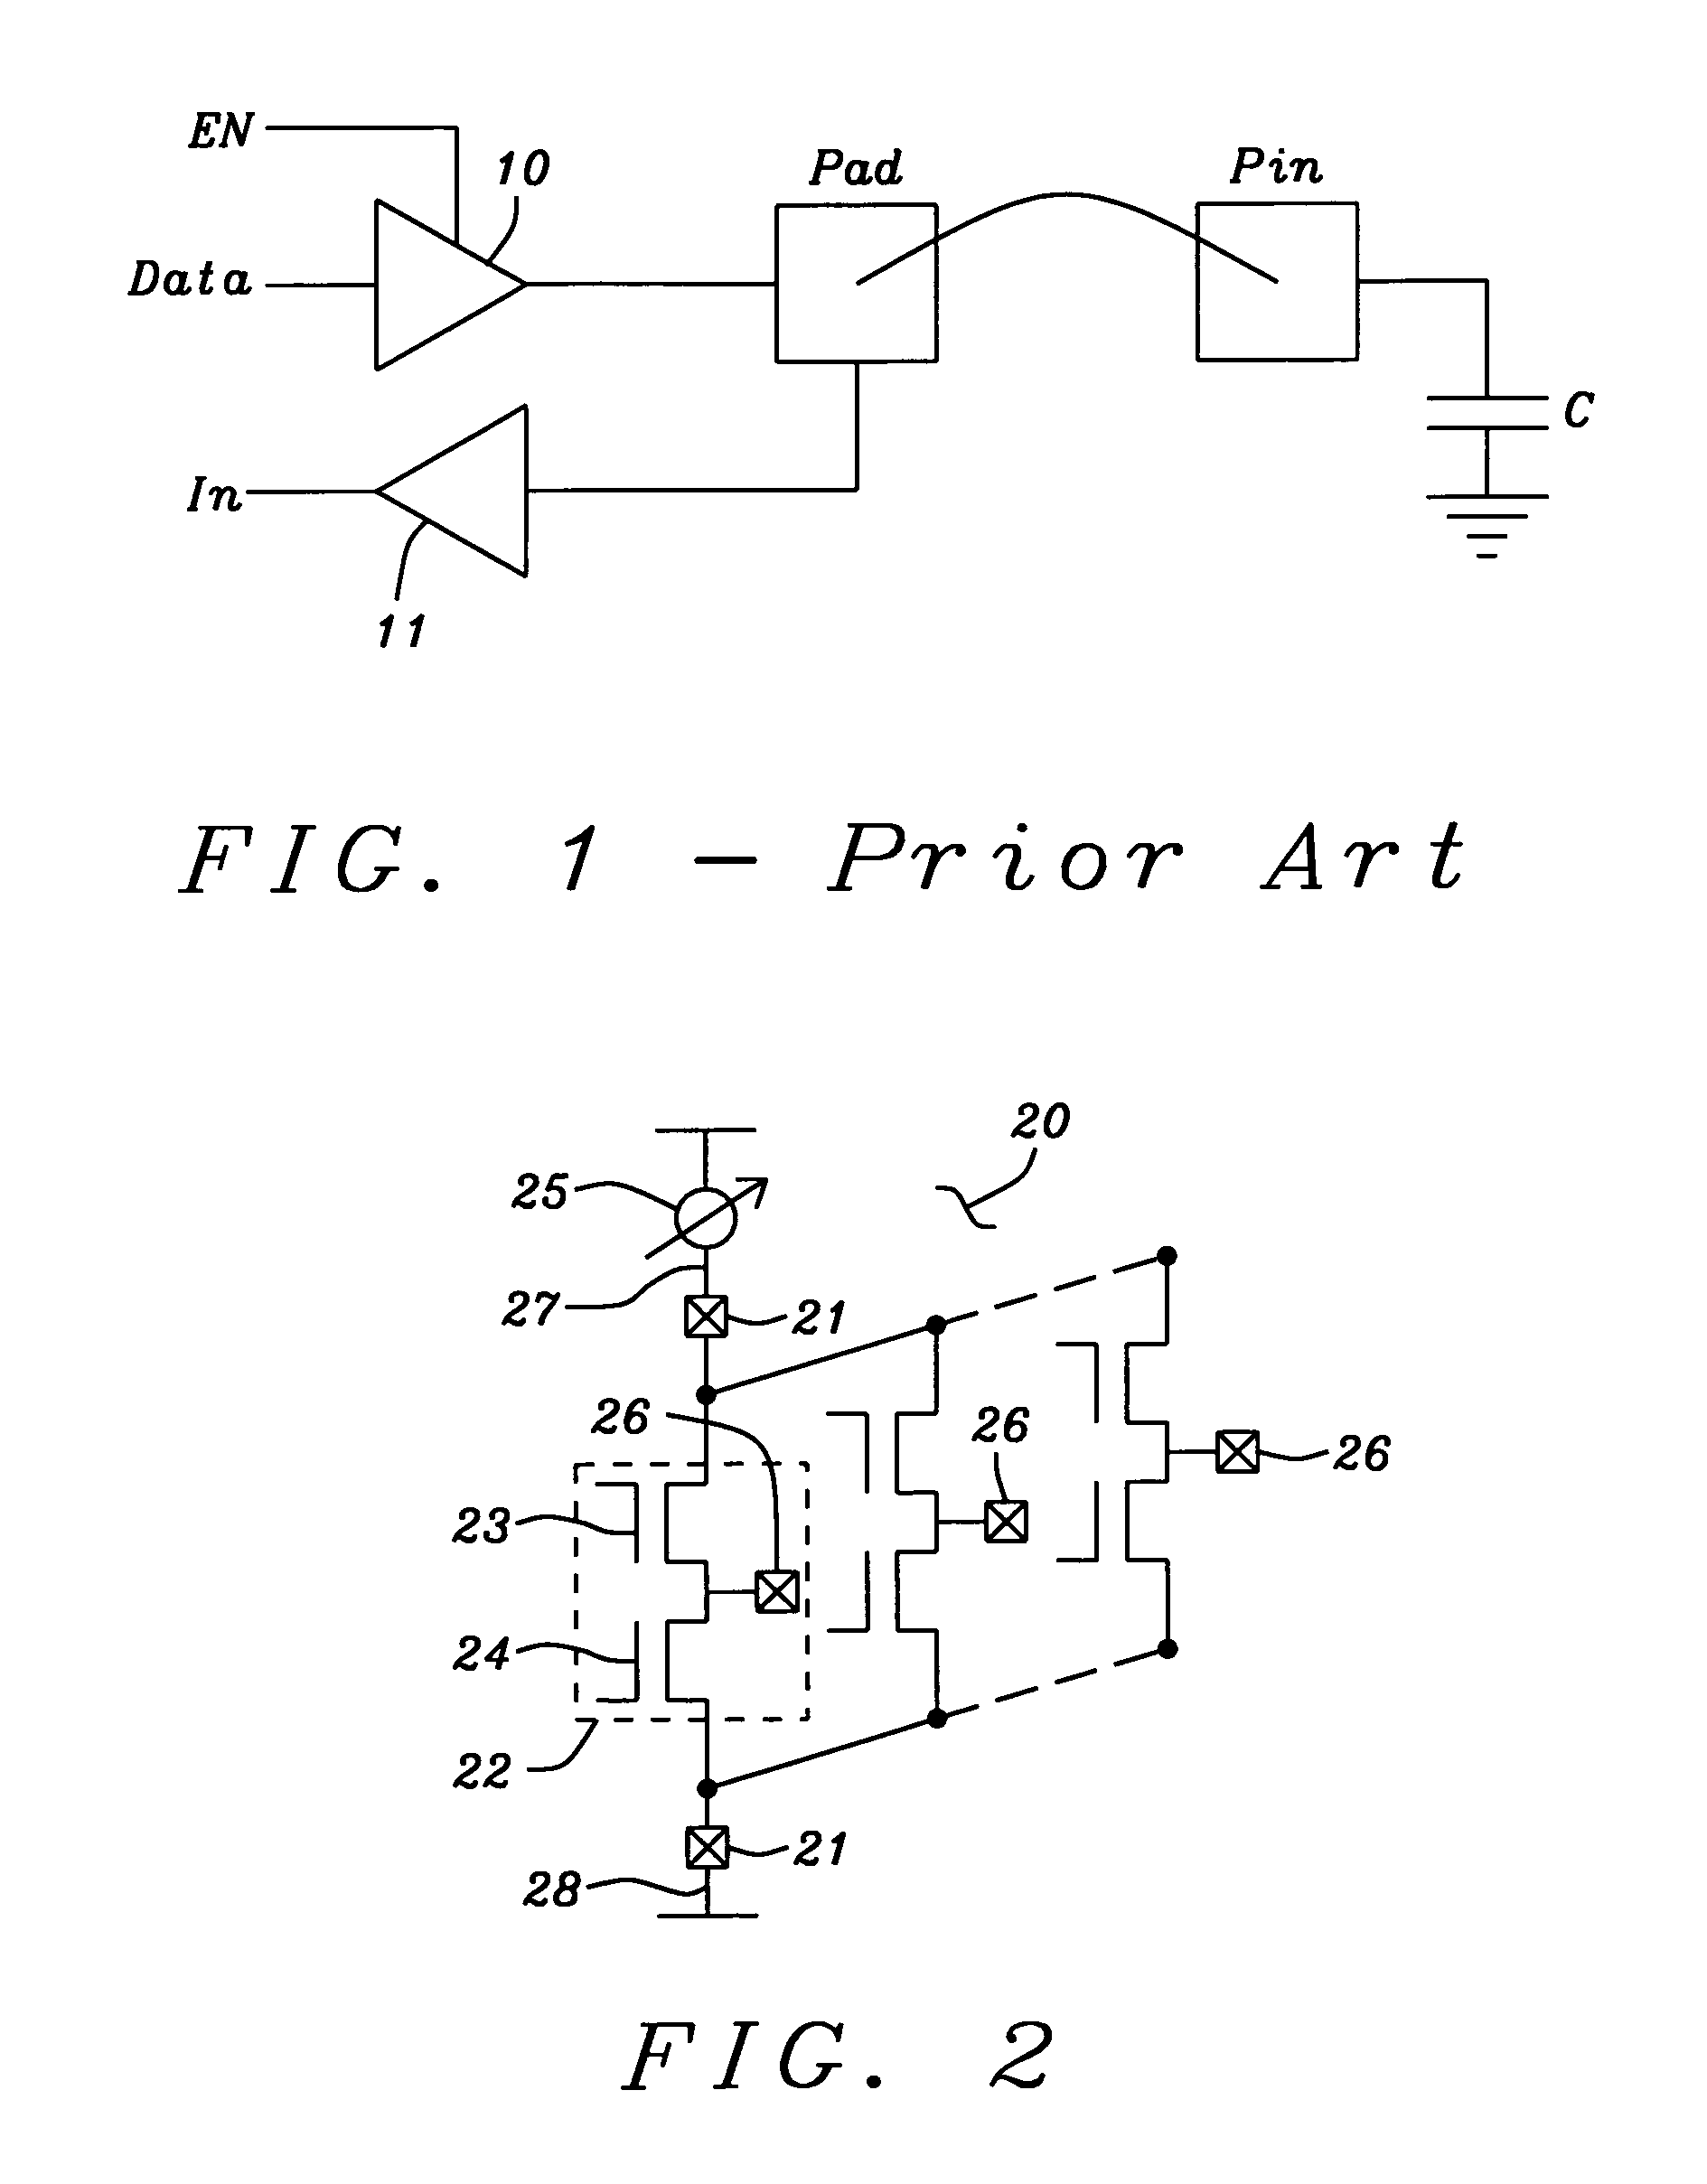 Supply current based testing of CMOS output stages